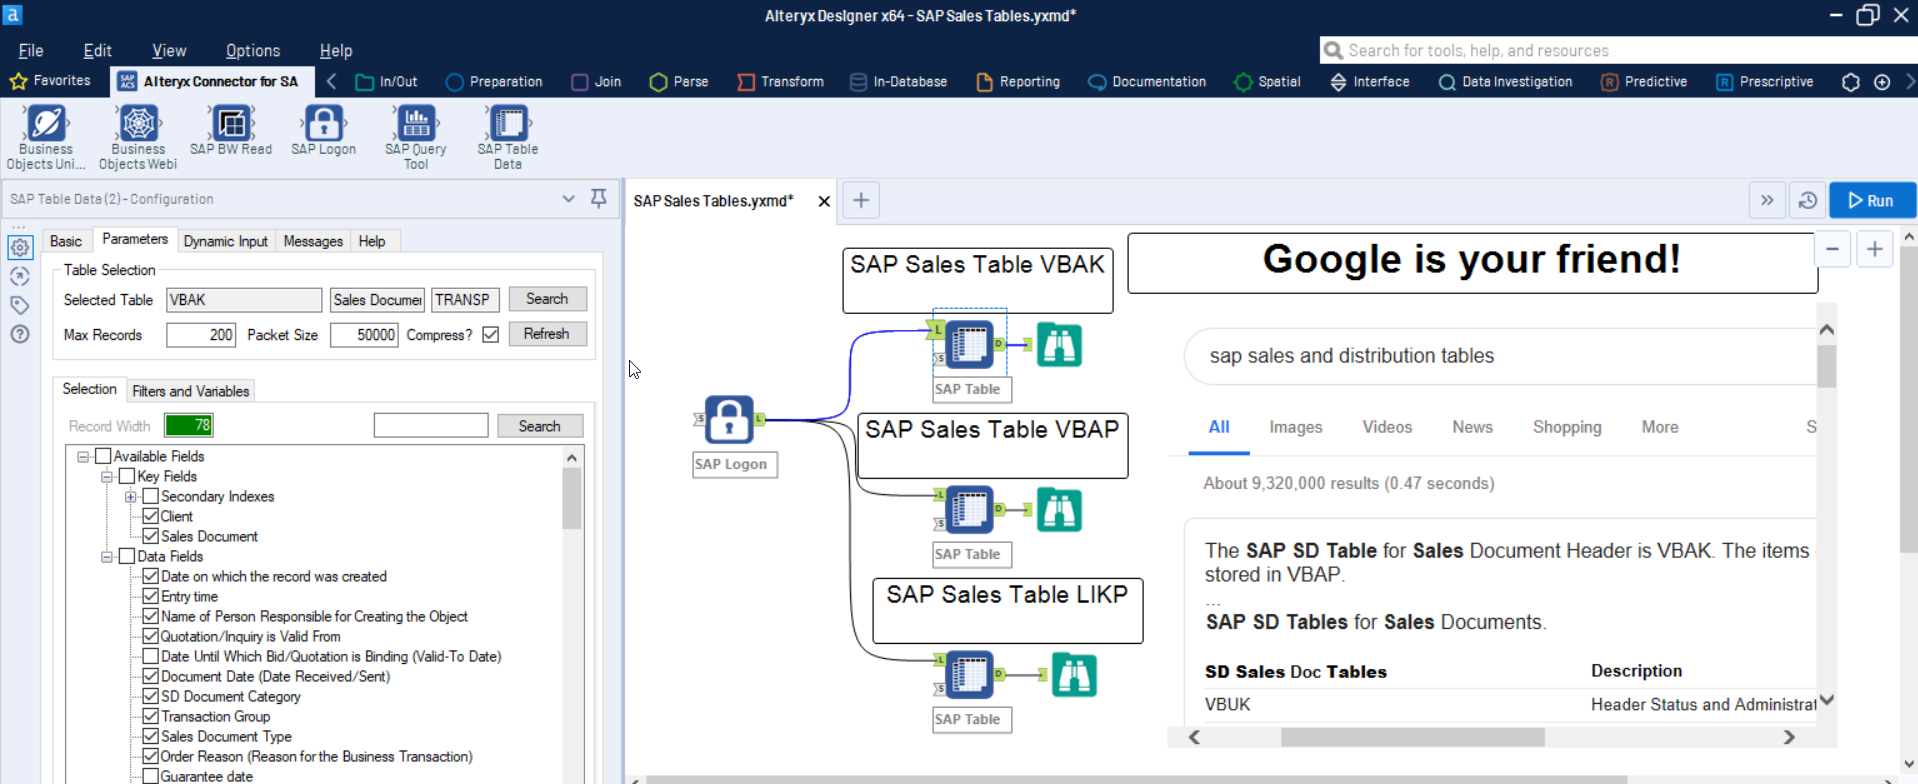 Saving Say Growl The most important SAP Sales and Distribution tables for Alteryx users -  DVW Analytics